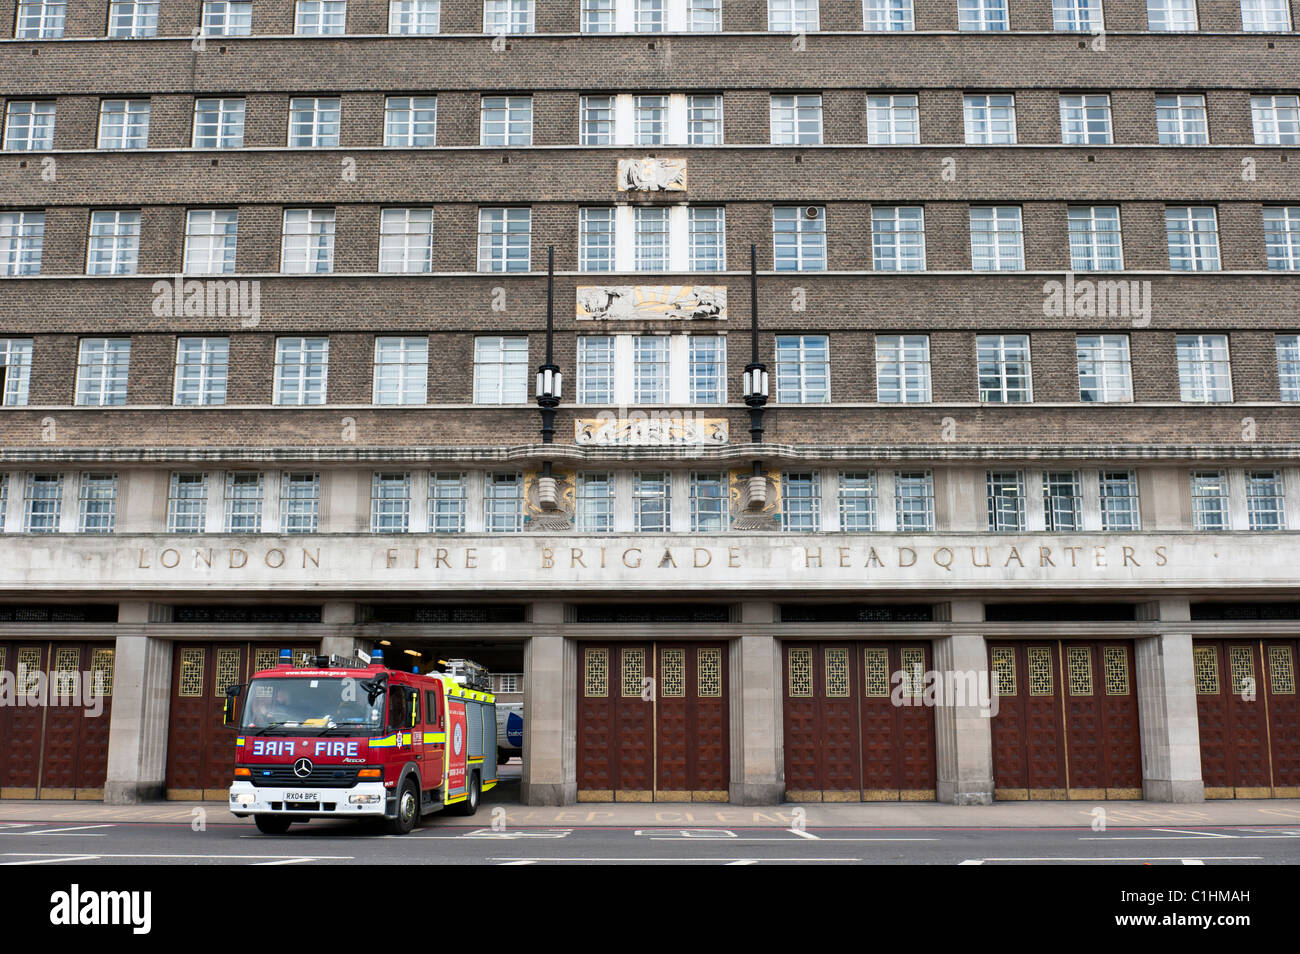 A fire engine with blue emergency lights leaves the London Fire Brigade Headquarters building on Albert Embankment. Stock Photo